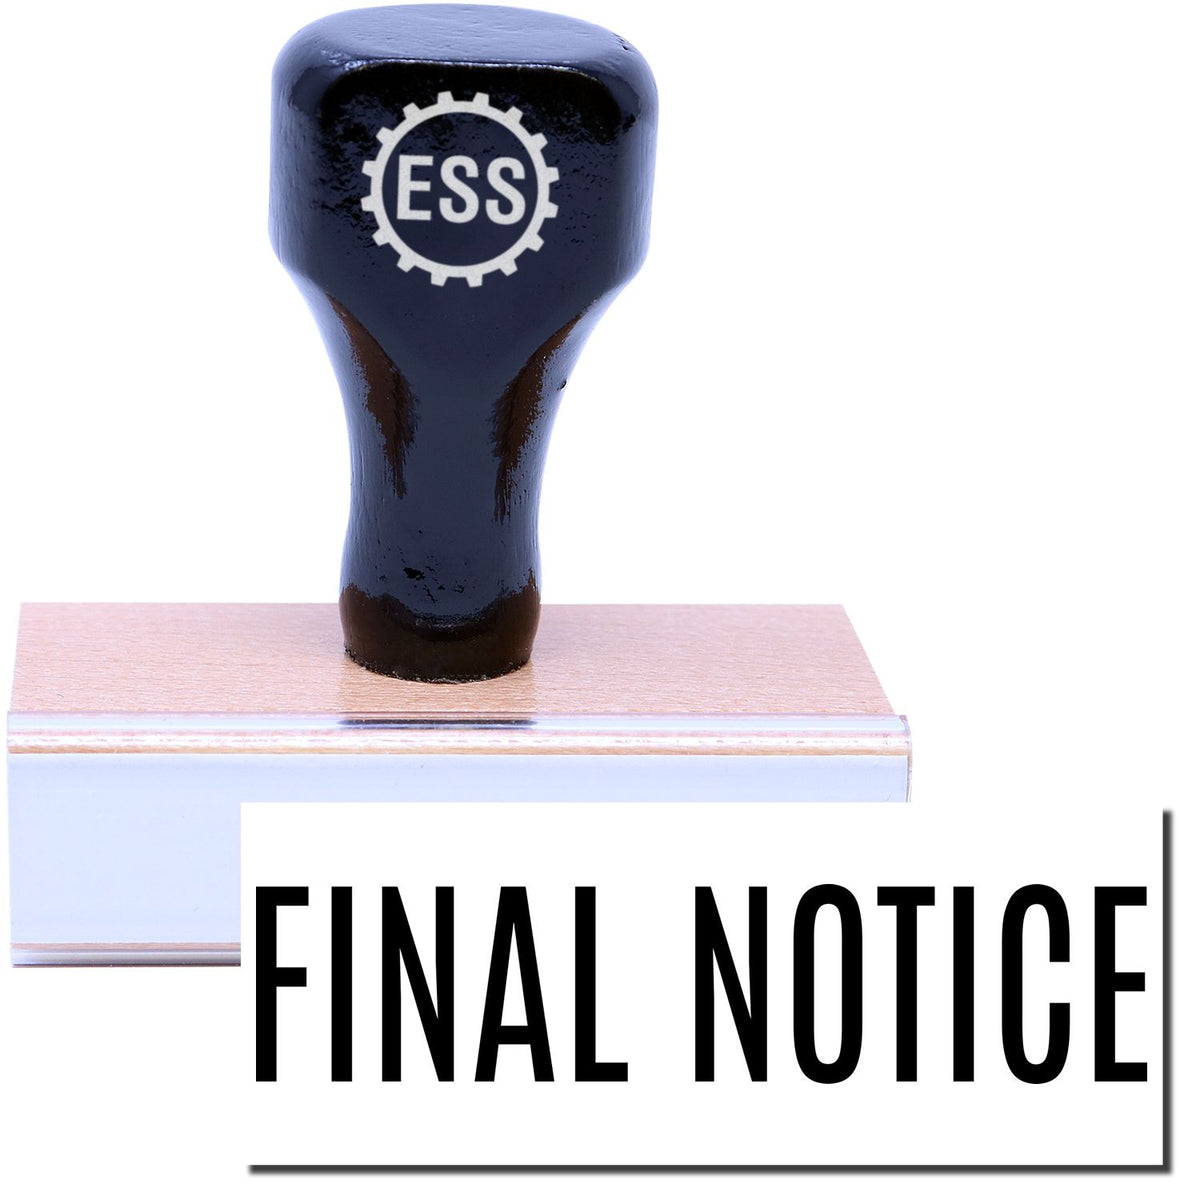 A stock office rubber stamp with a stamped image showing how the text &quot;FINAL NOTICE&quot; in a large narrow font is displayed after stamping.